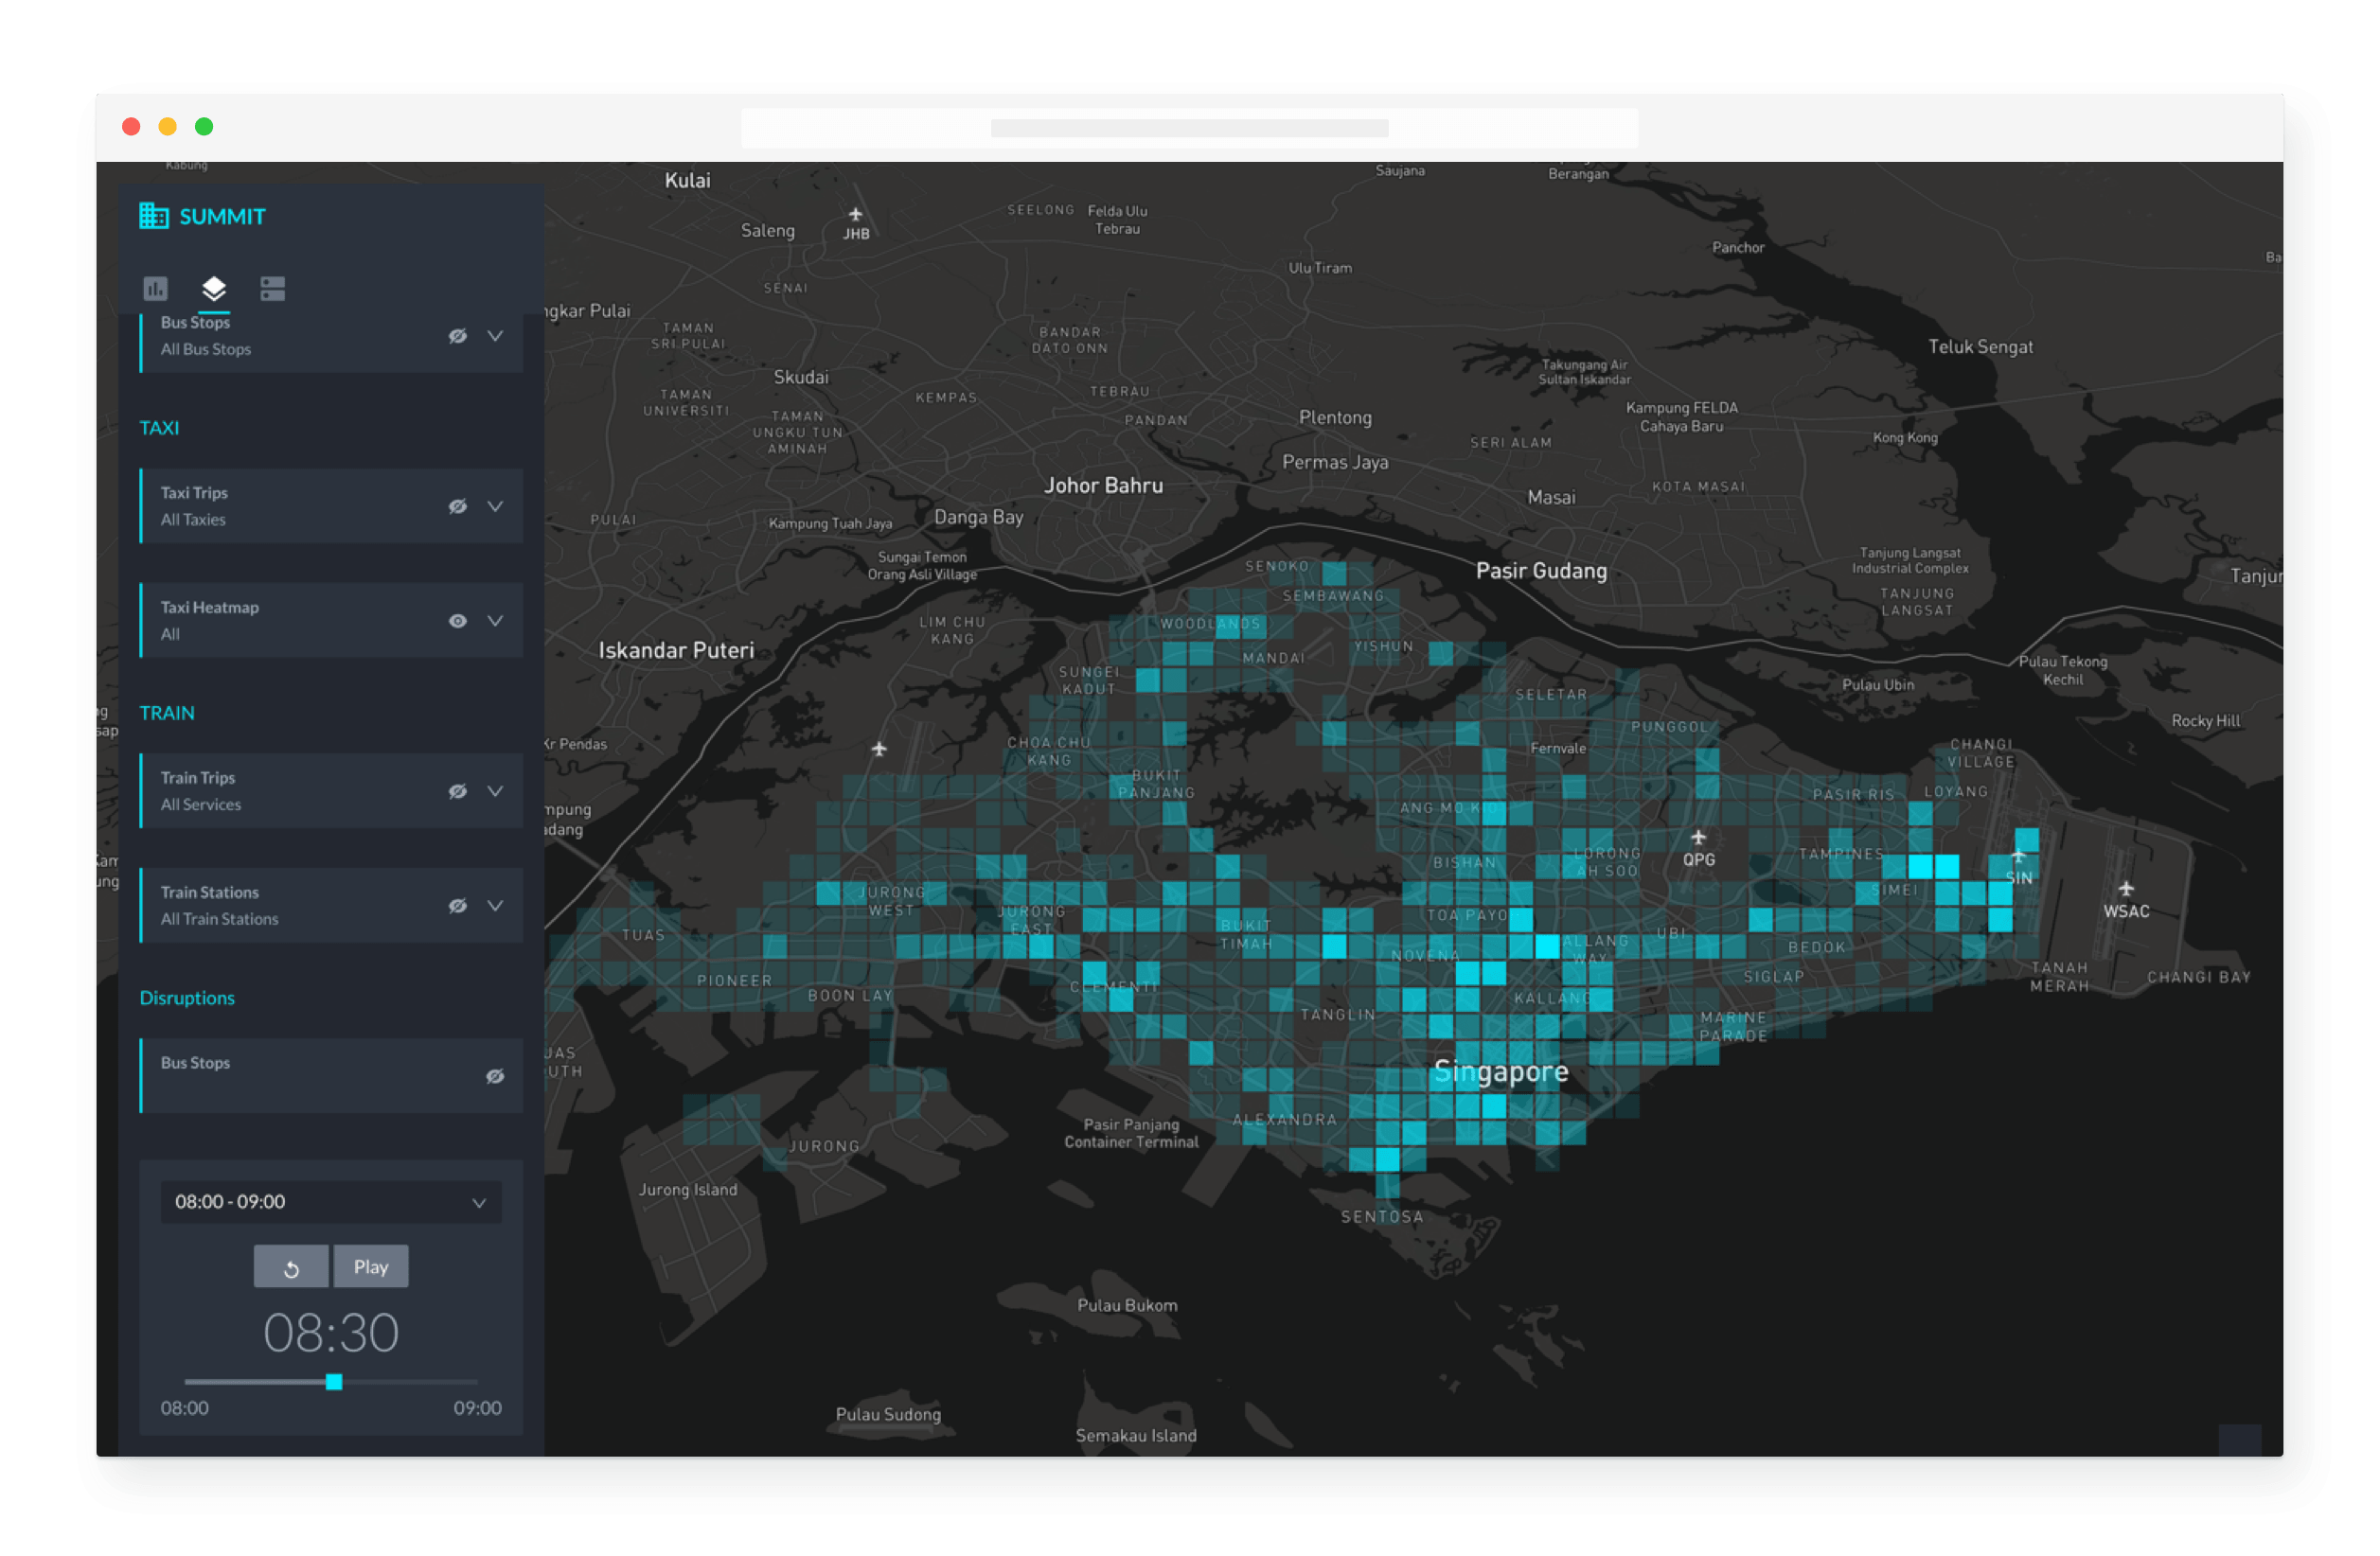 Heatmap of taxi density in Singapore